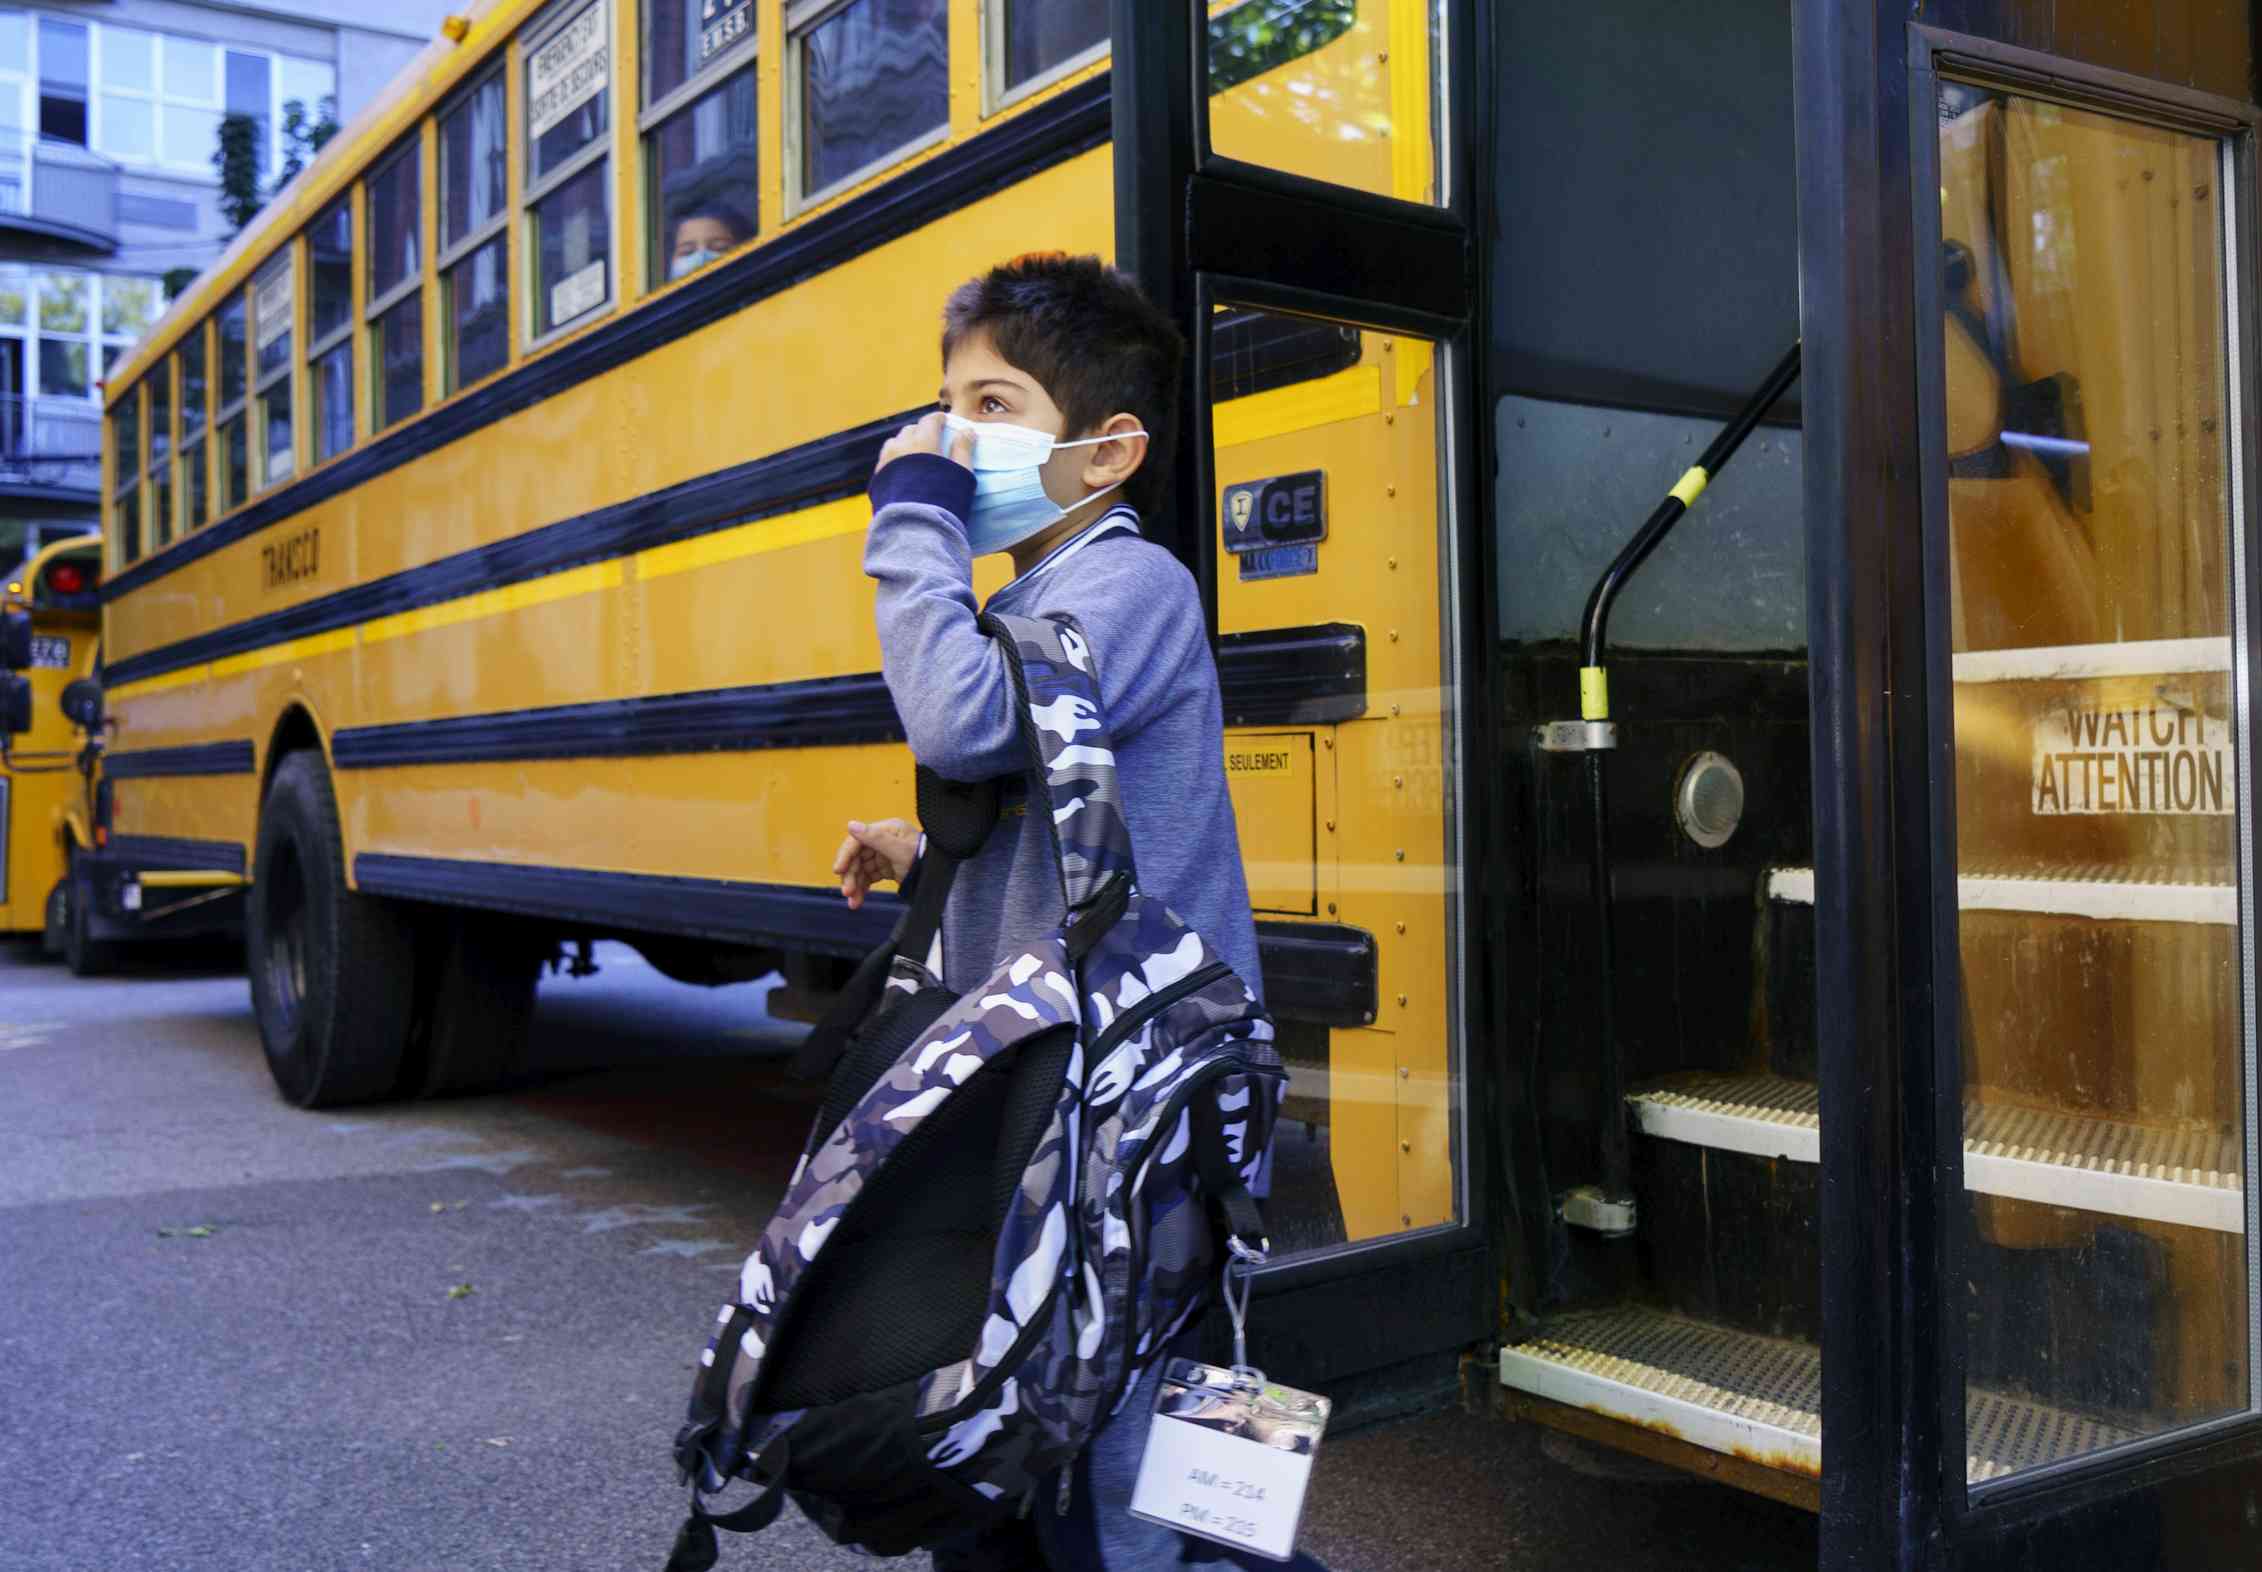 A student steps off a school bus.